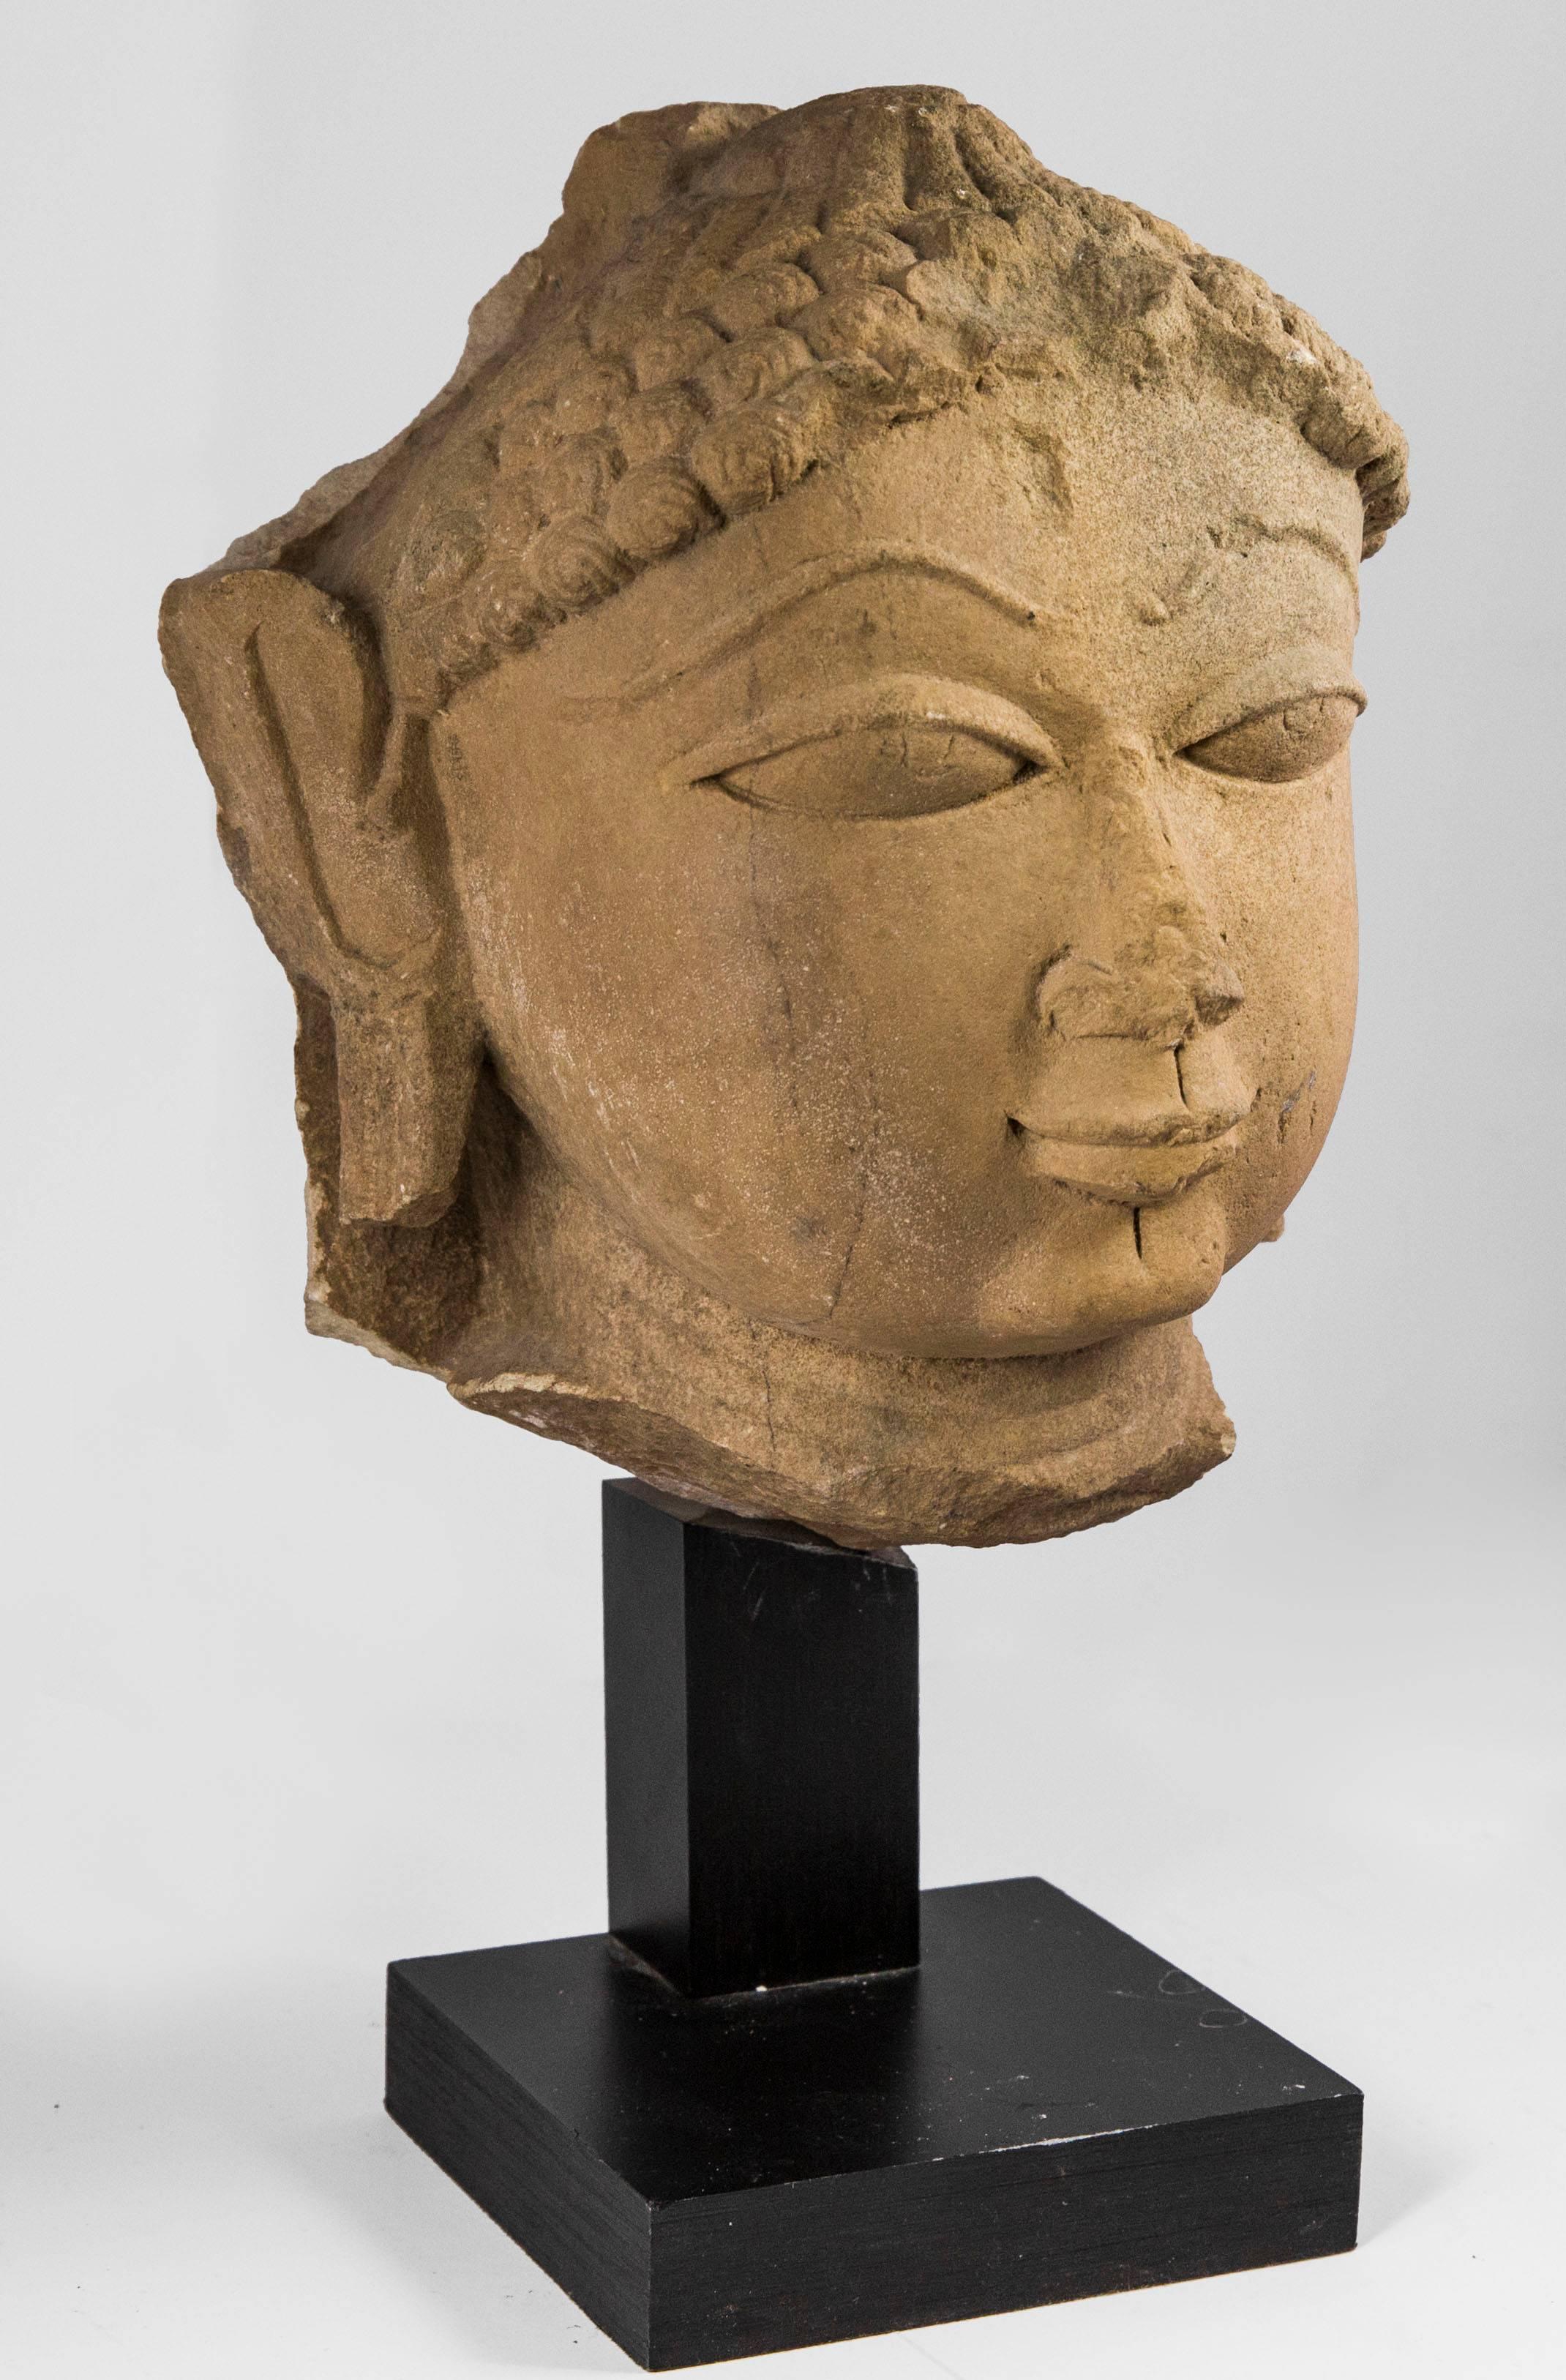 Yellow sandstone head portraying Buddha Shakyamuni with meditative expression. He has a fleshy mouth and large slightly-elongated eyes. His hair is tied back in a bun and his ears are also stretched, this characteristic being typical of Shakyamuni